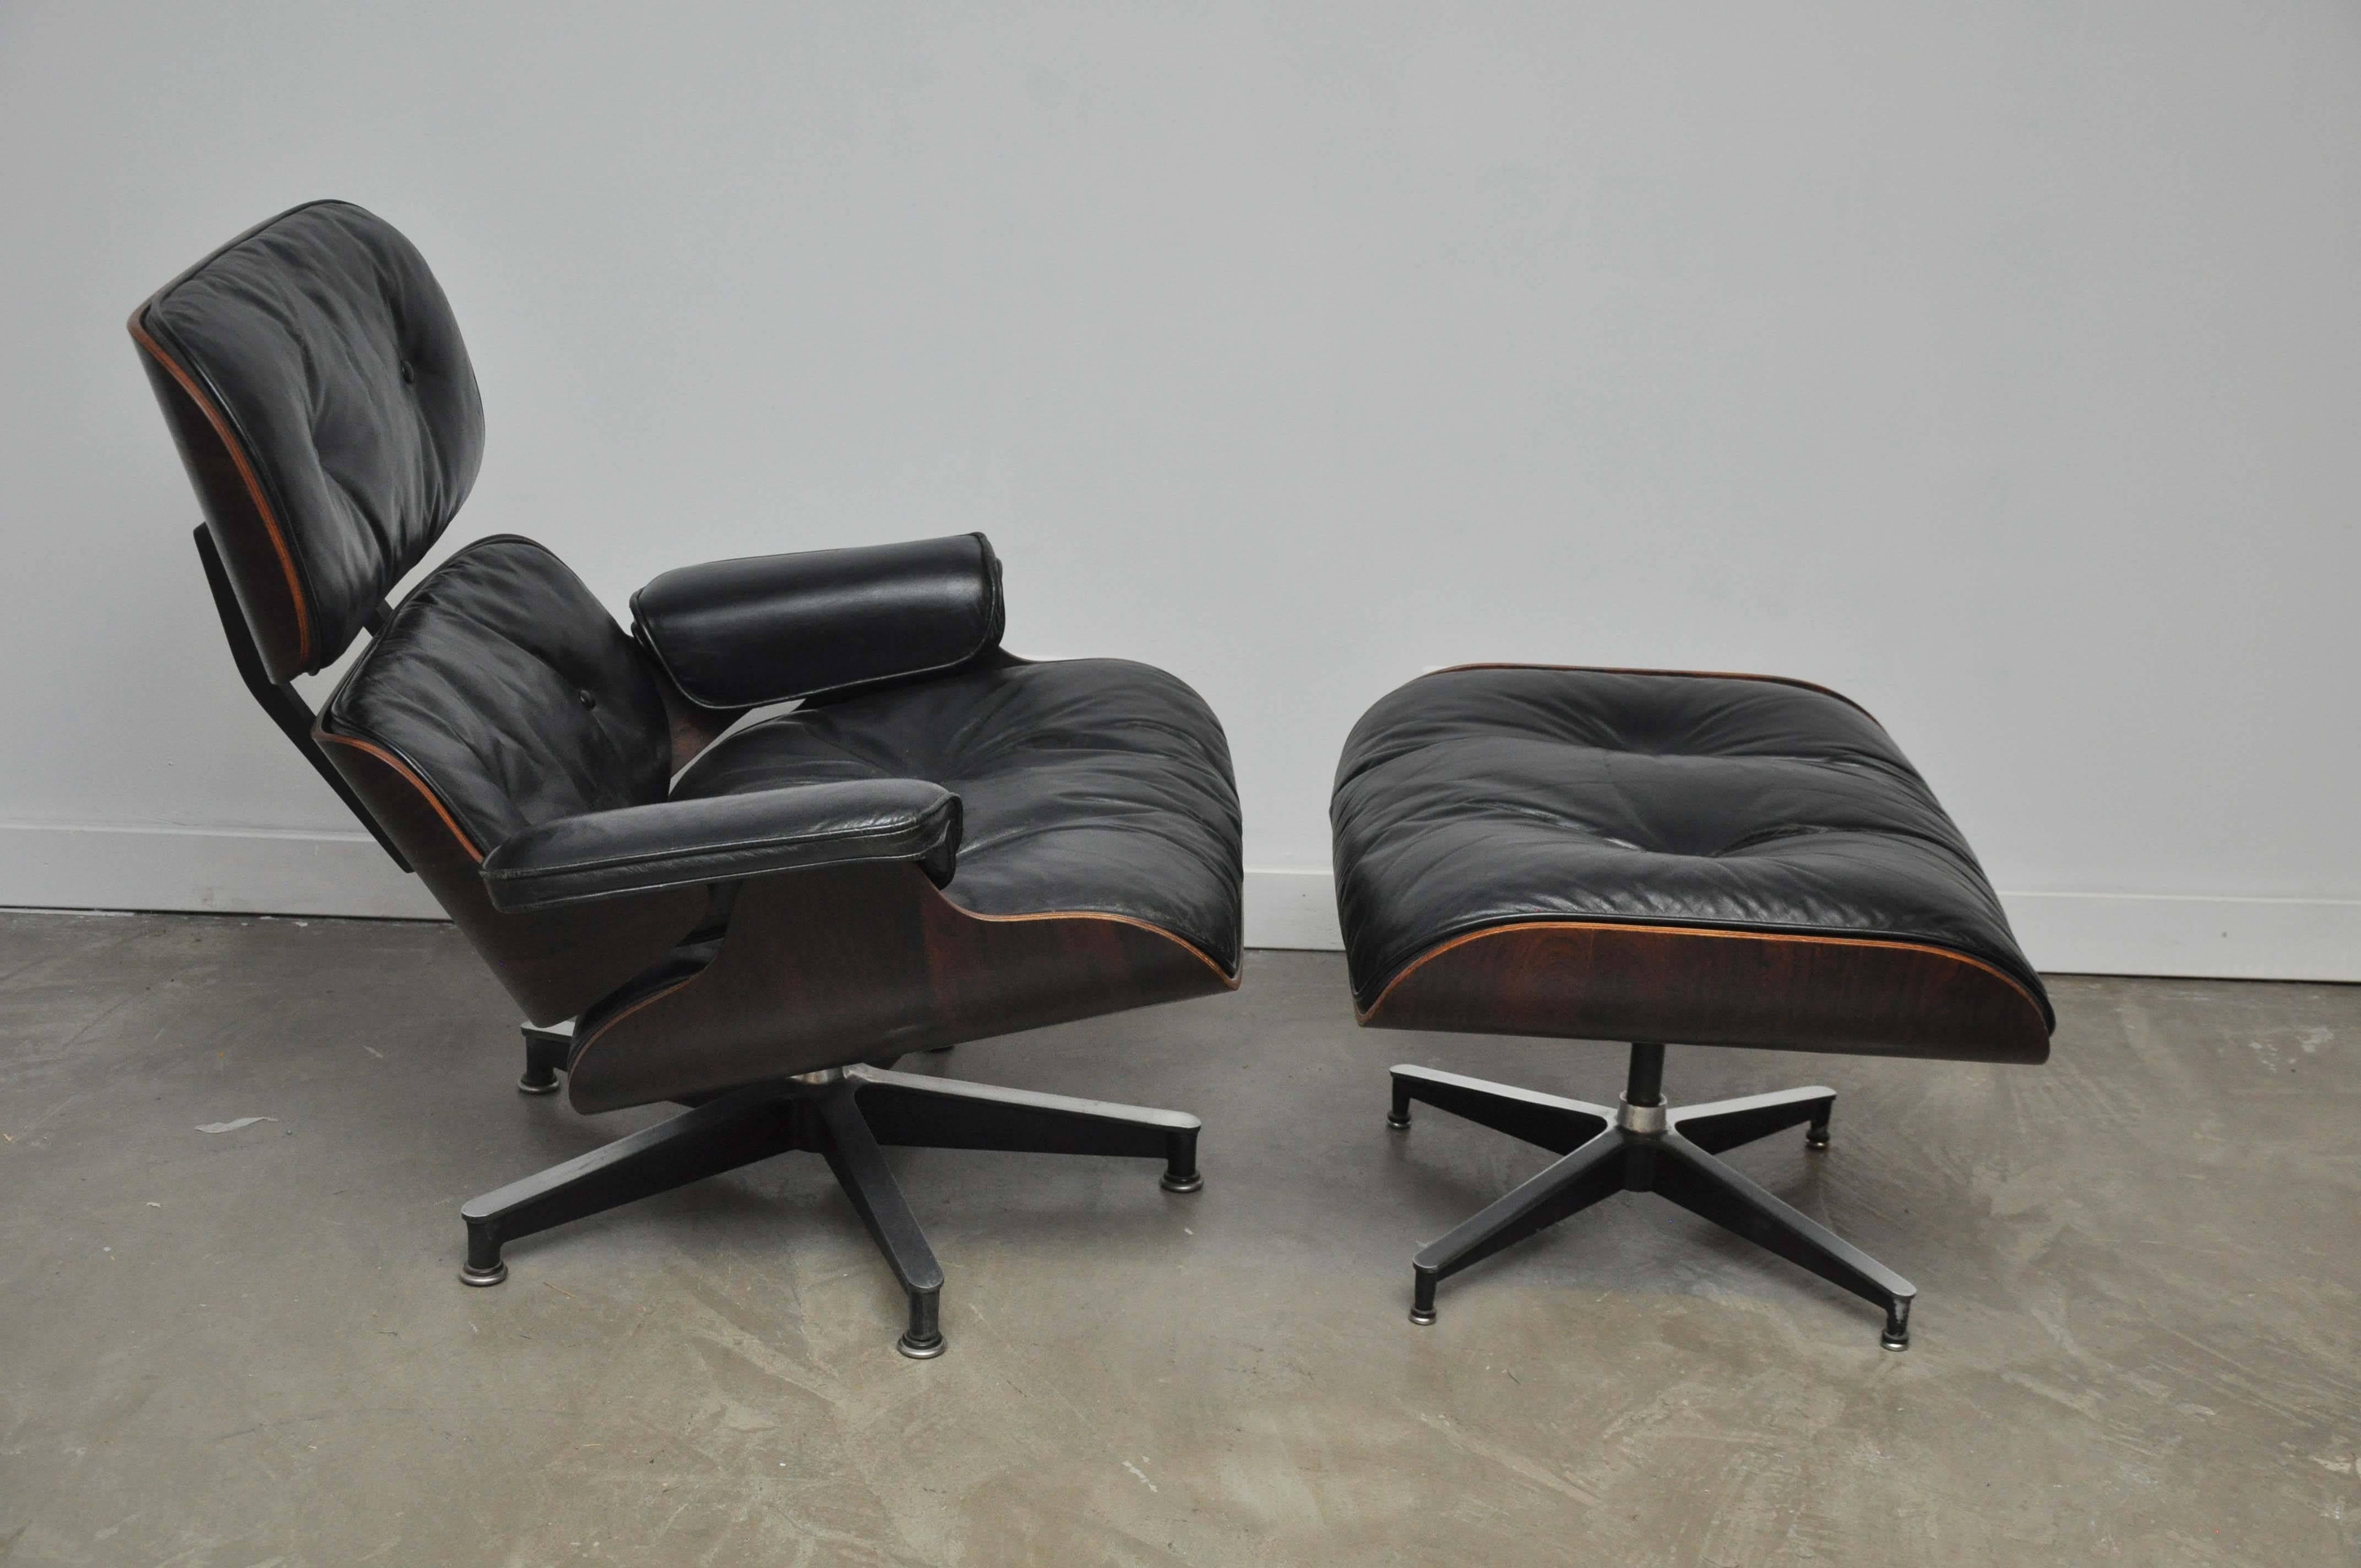 Rosewood lounge chair and ottoman designed by Charles and Ray Eames for Herman Miller. Original black leather and rosewood shells, all in excellent condition. Early model, circa 1950s.